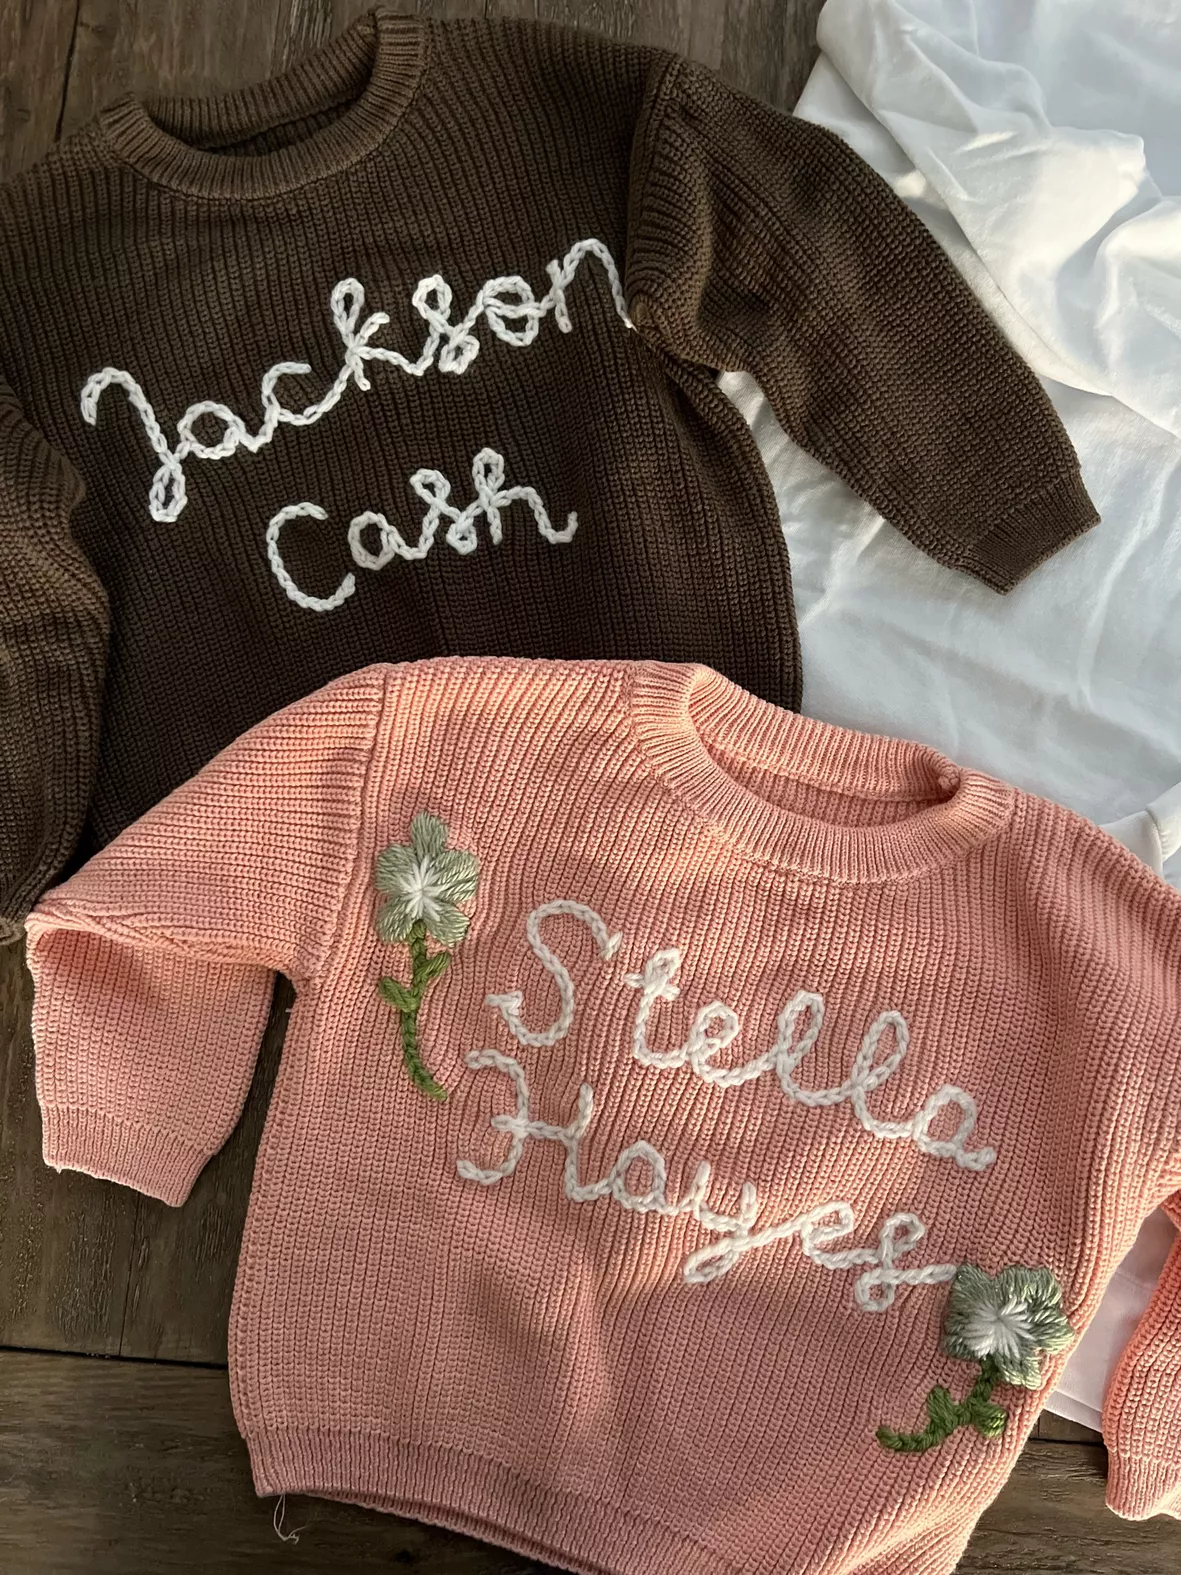 Baby Name Sweater Hand Embroidered Baby Sweater custom Baby 